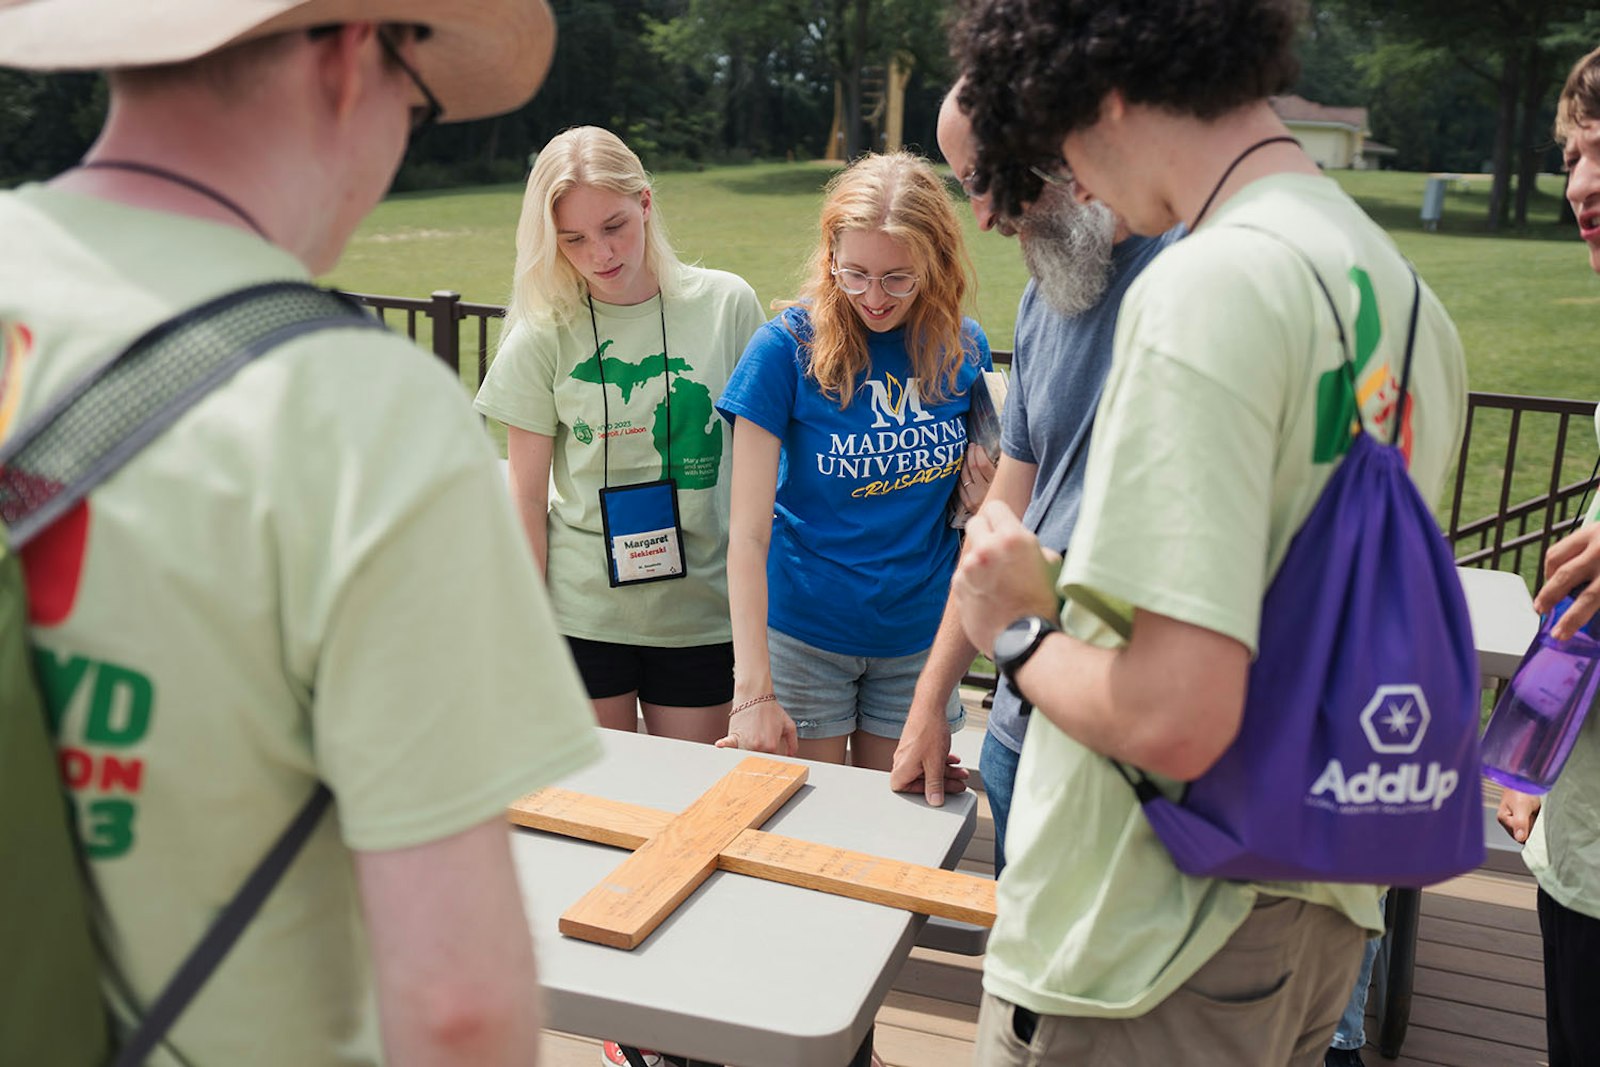 Young people carry a wooden cross signed with the locations and dates of each prior World Youth Day during the World Youth Day "Home" event at Our Lady of the Fields Camp in Brighton.